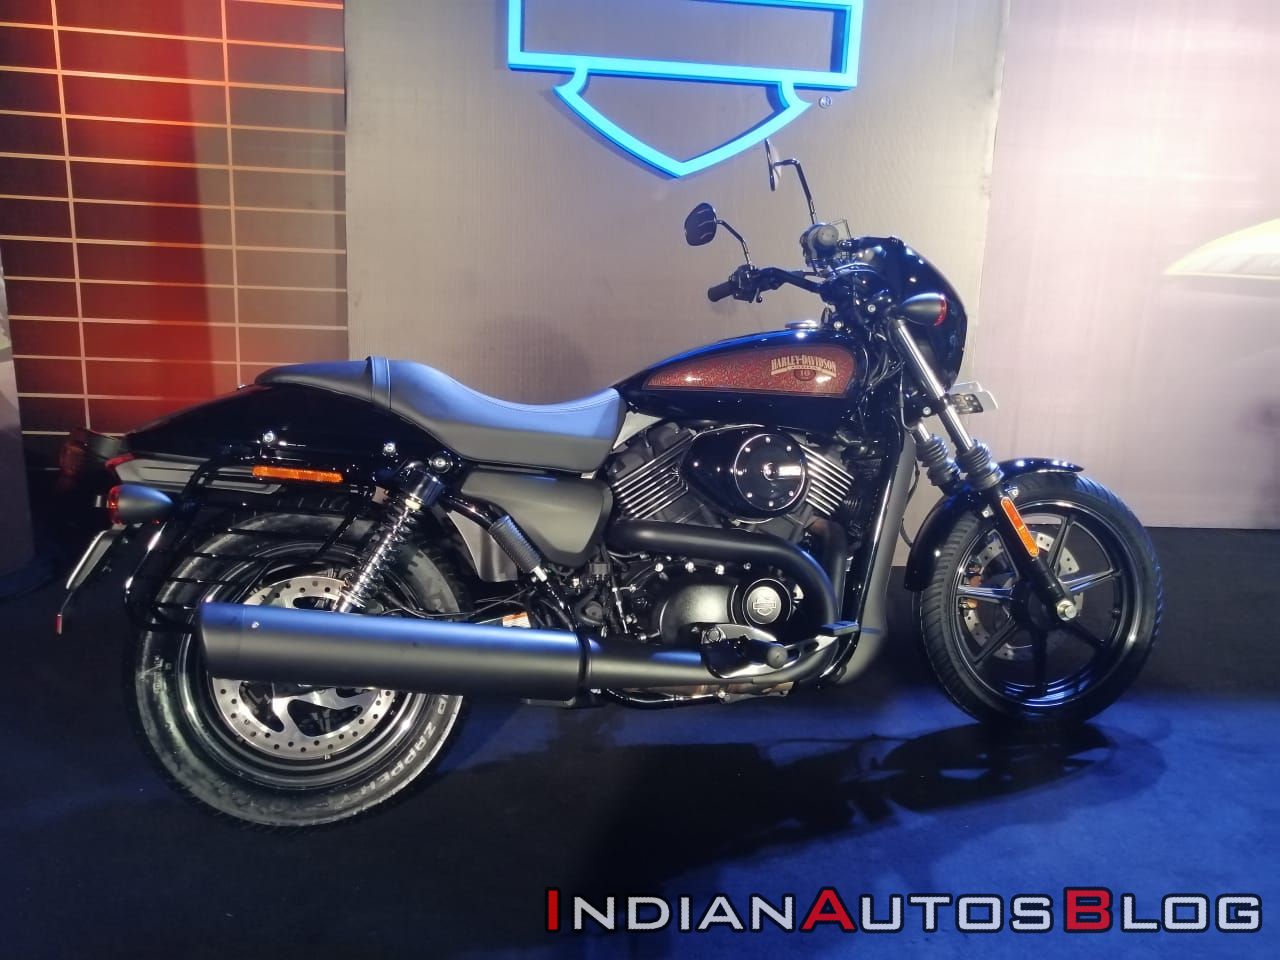 Harley Davidson Street 750 Available At A Flat Discount Of Inr 72 000